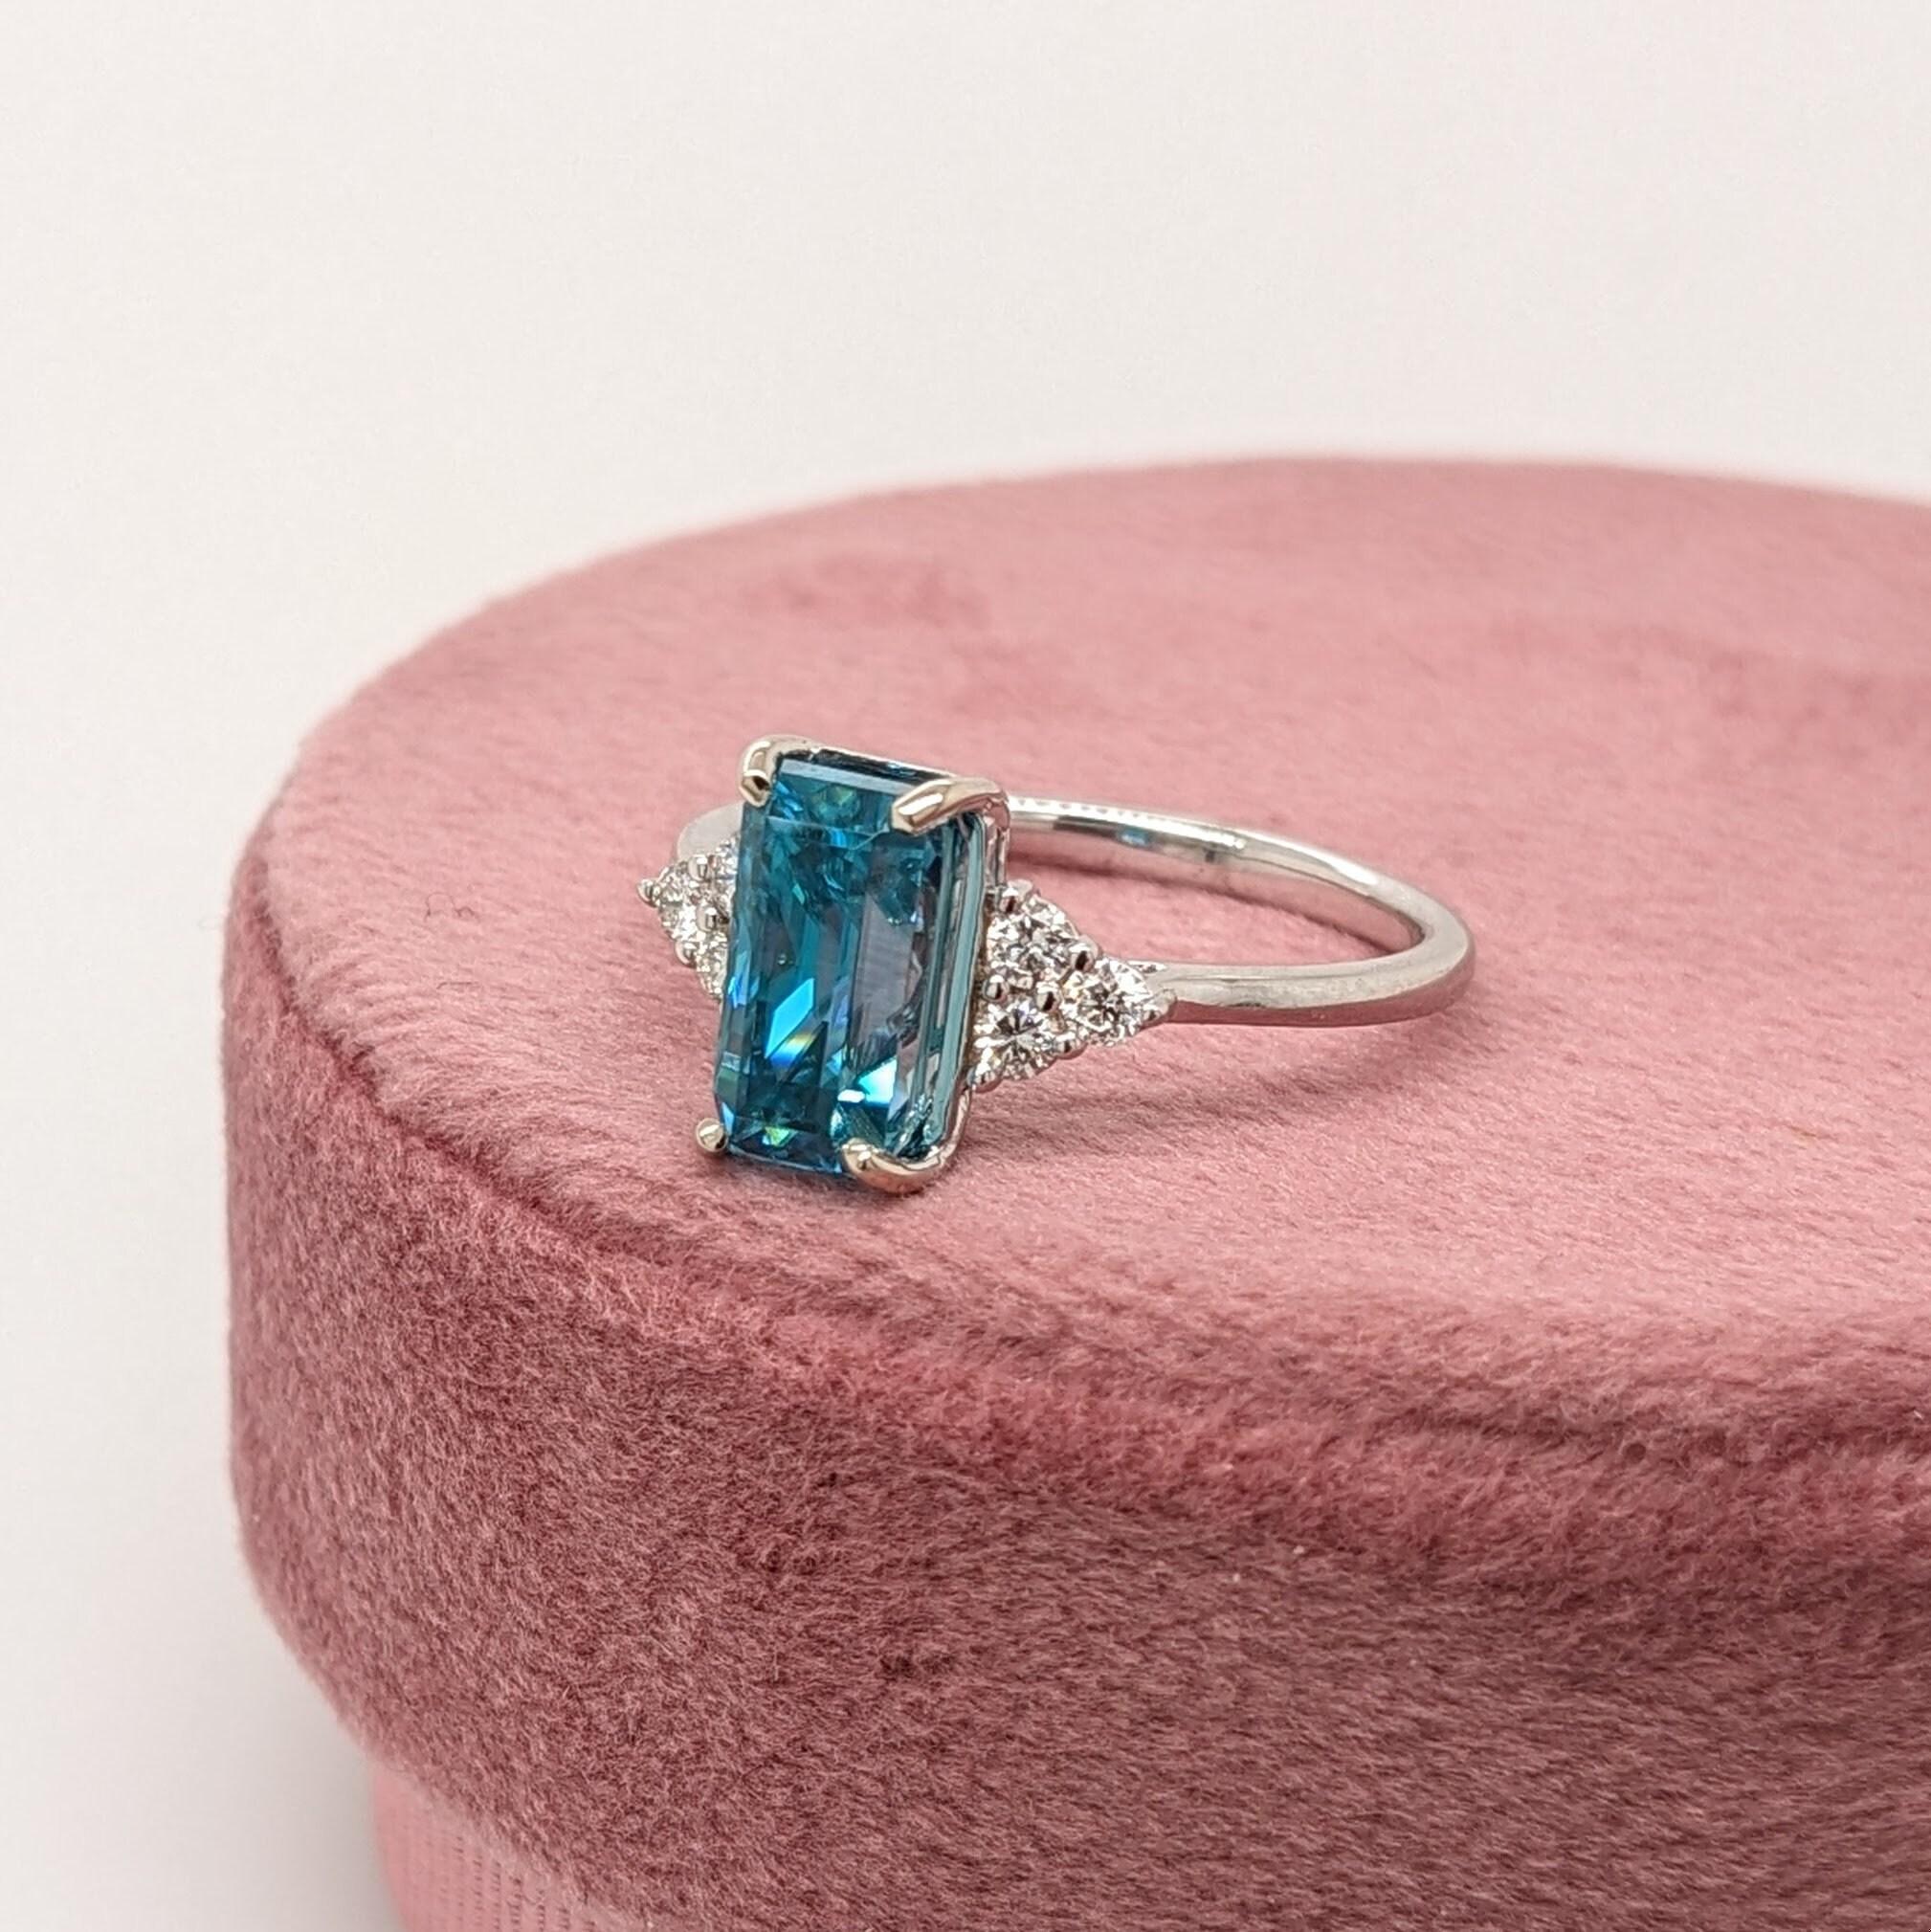 This statement ring features a gorgeous sparkling natural blue zircon in 14K solid white gold with a trio of diamond accents on either side making a cute minimalist design. A gorgeous ring for a modern bride, a December baby, or a lover of things